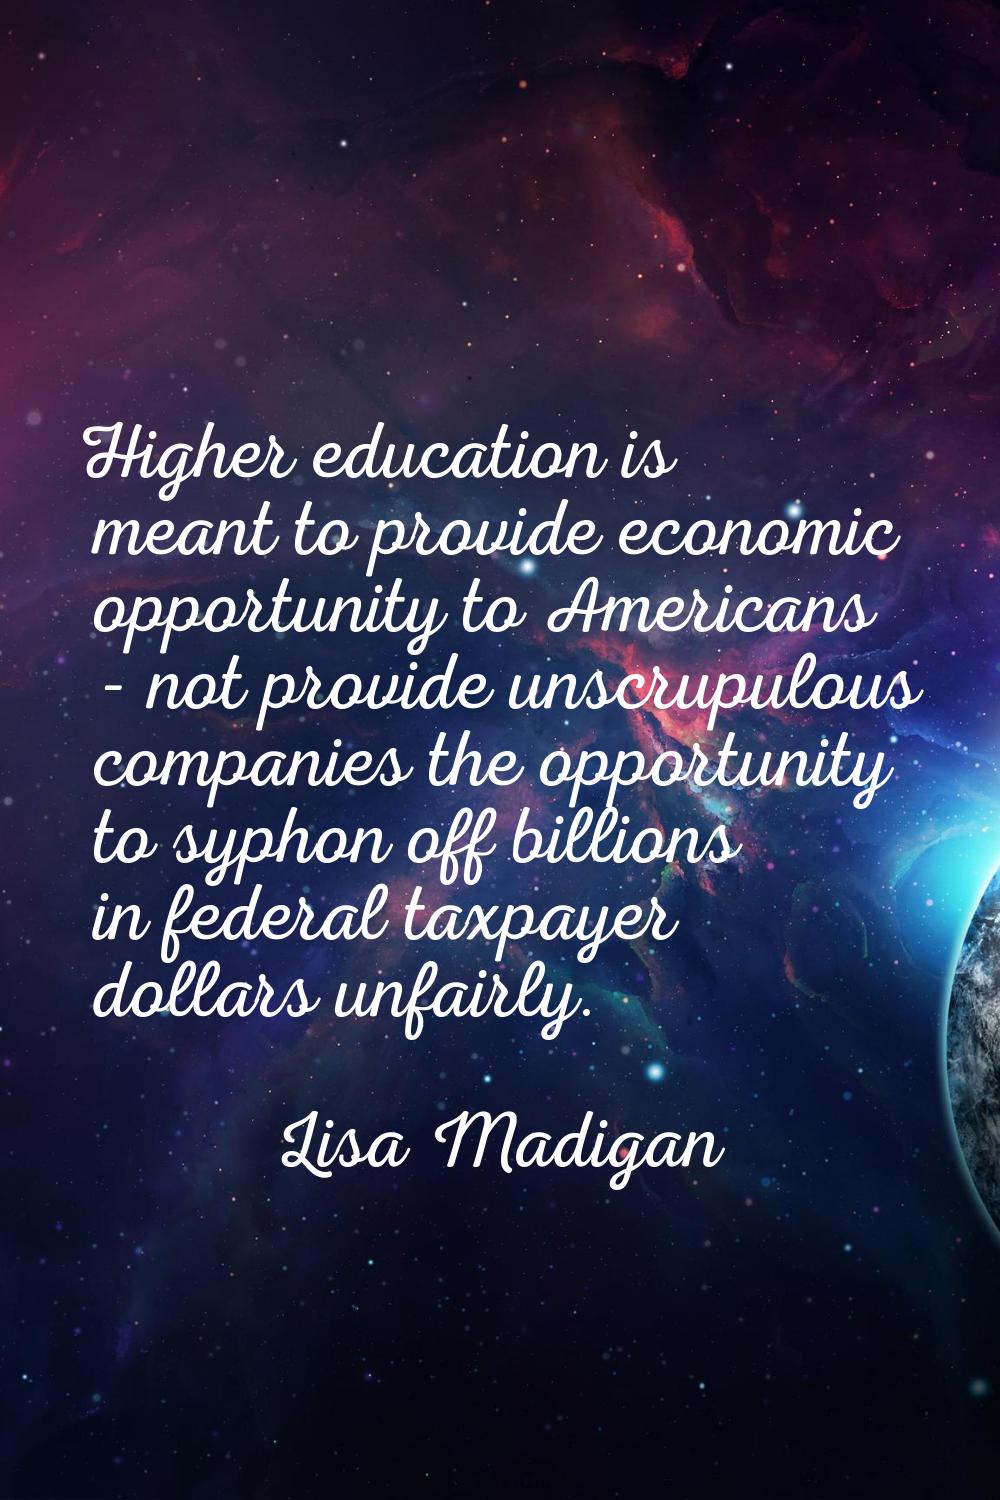 Higher education is meant to provide economic opportunity to Americans - not provide unscrupulous c